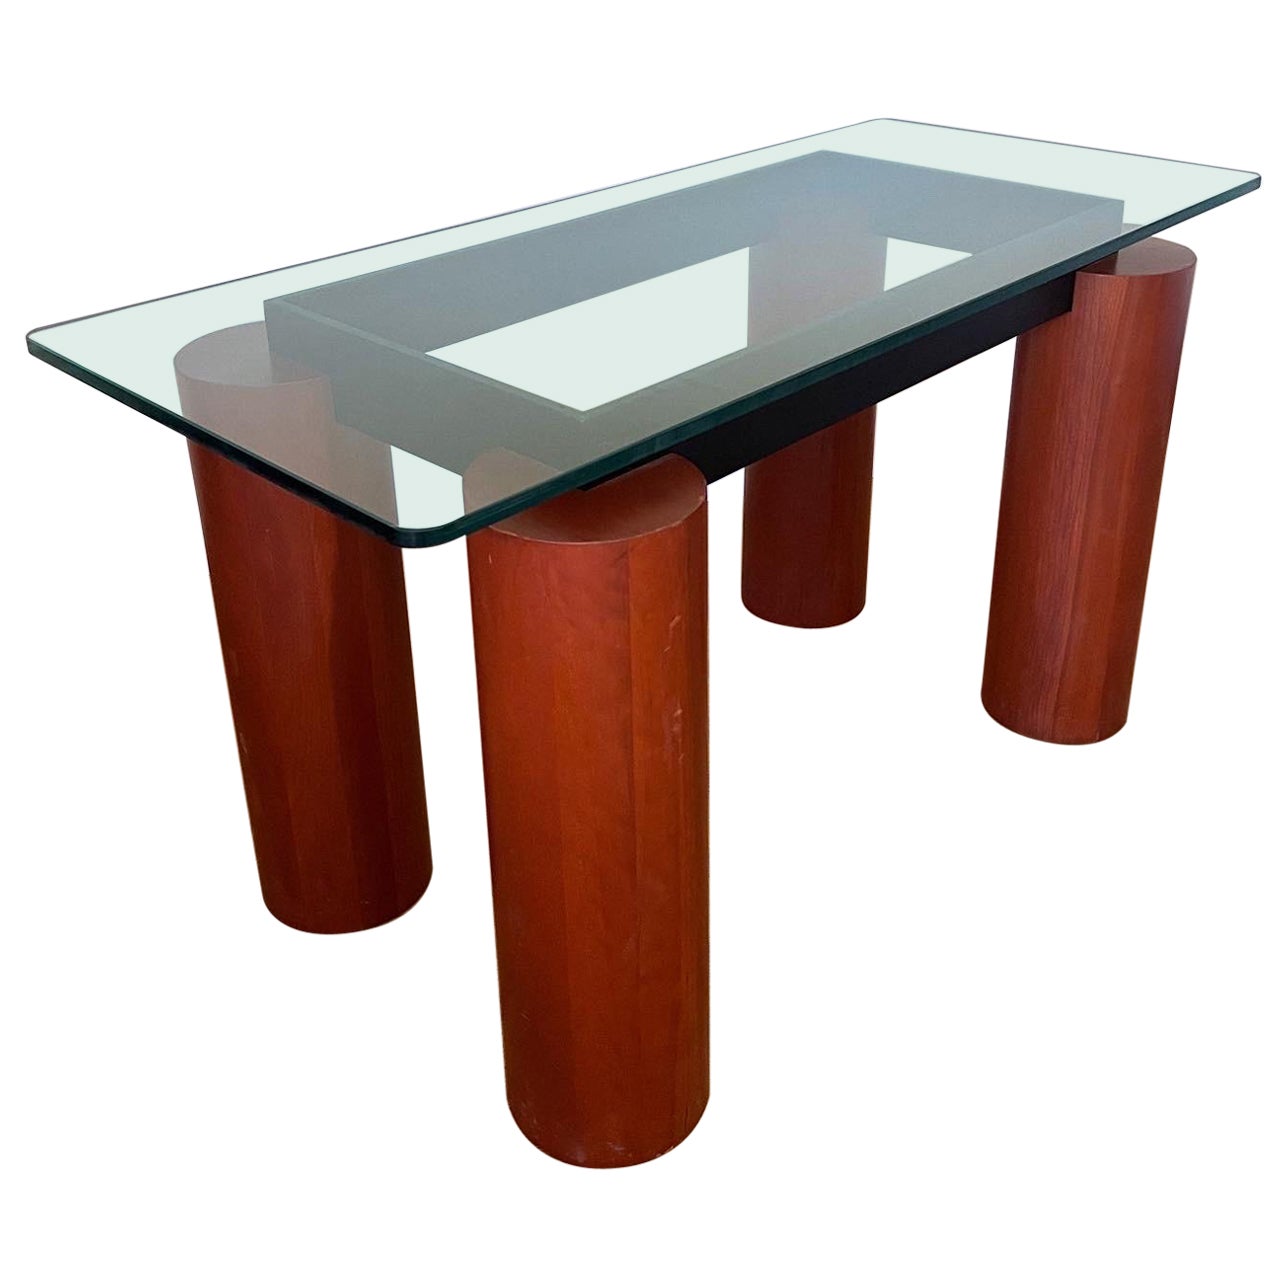 Postmodern Console Table in the Style of Lela & Massimo Vignelli’s “Serenissimo” For Sale